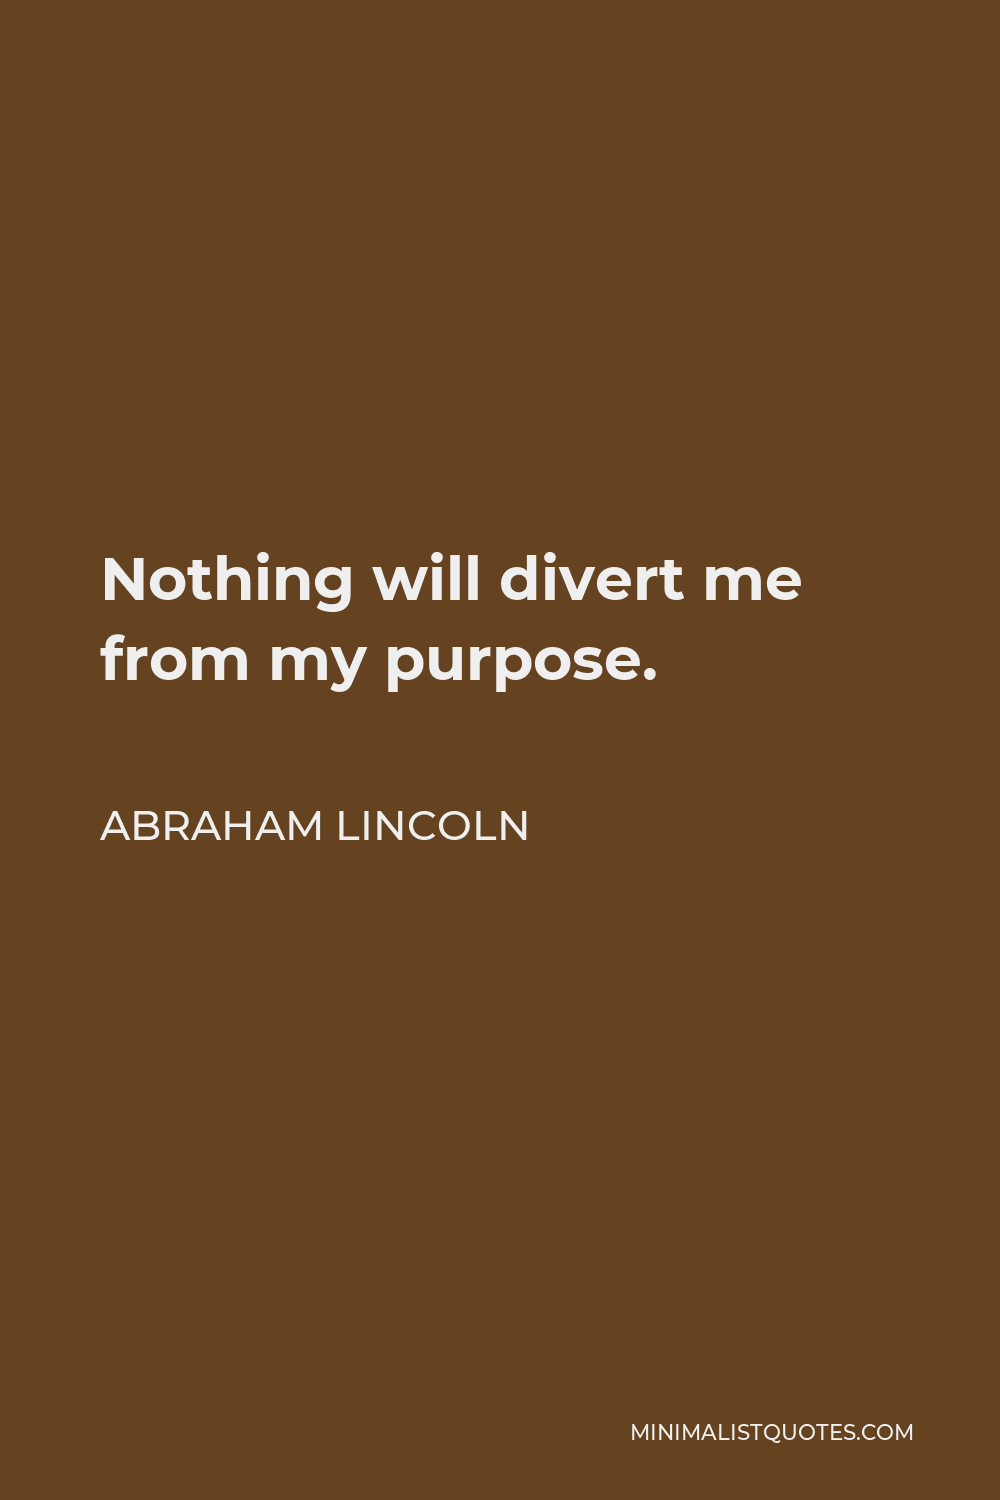 Abraham Lincoln Quote: Nothing will divert me from my purpose.